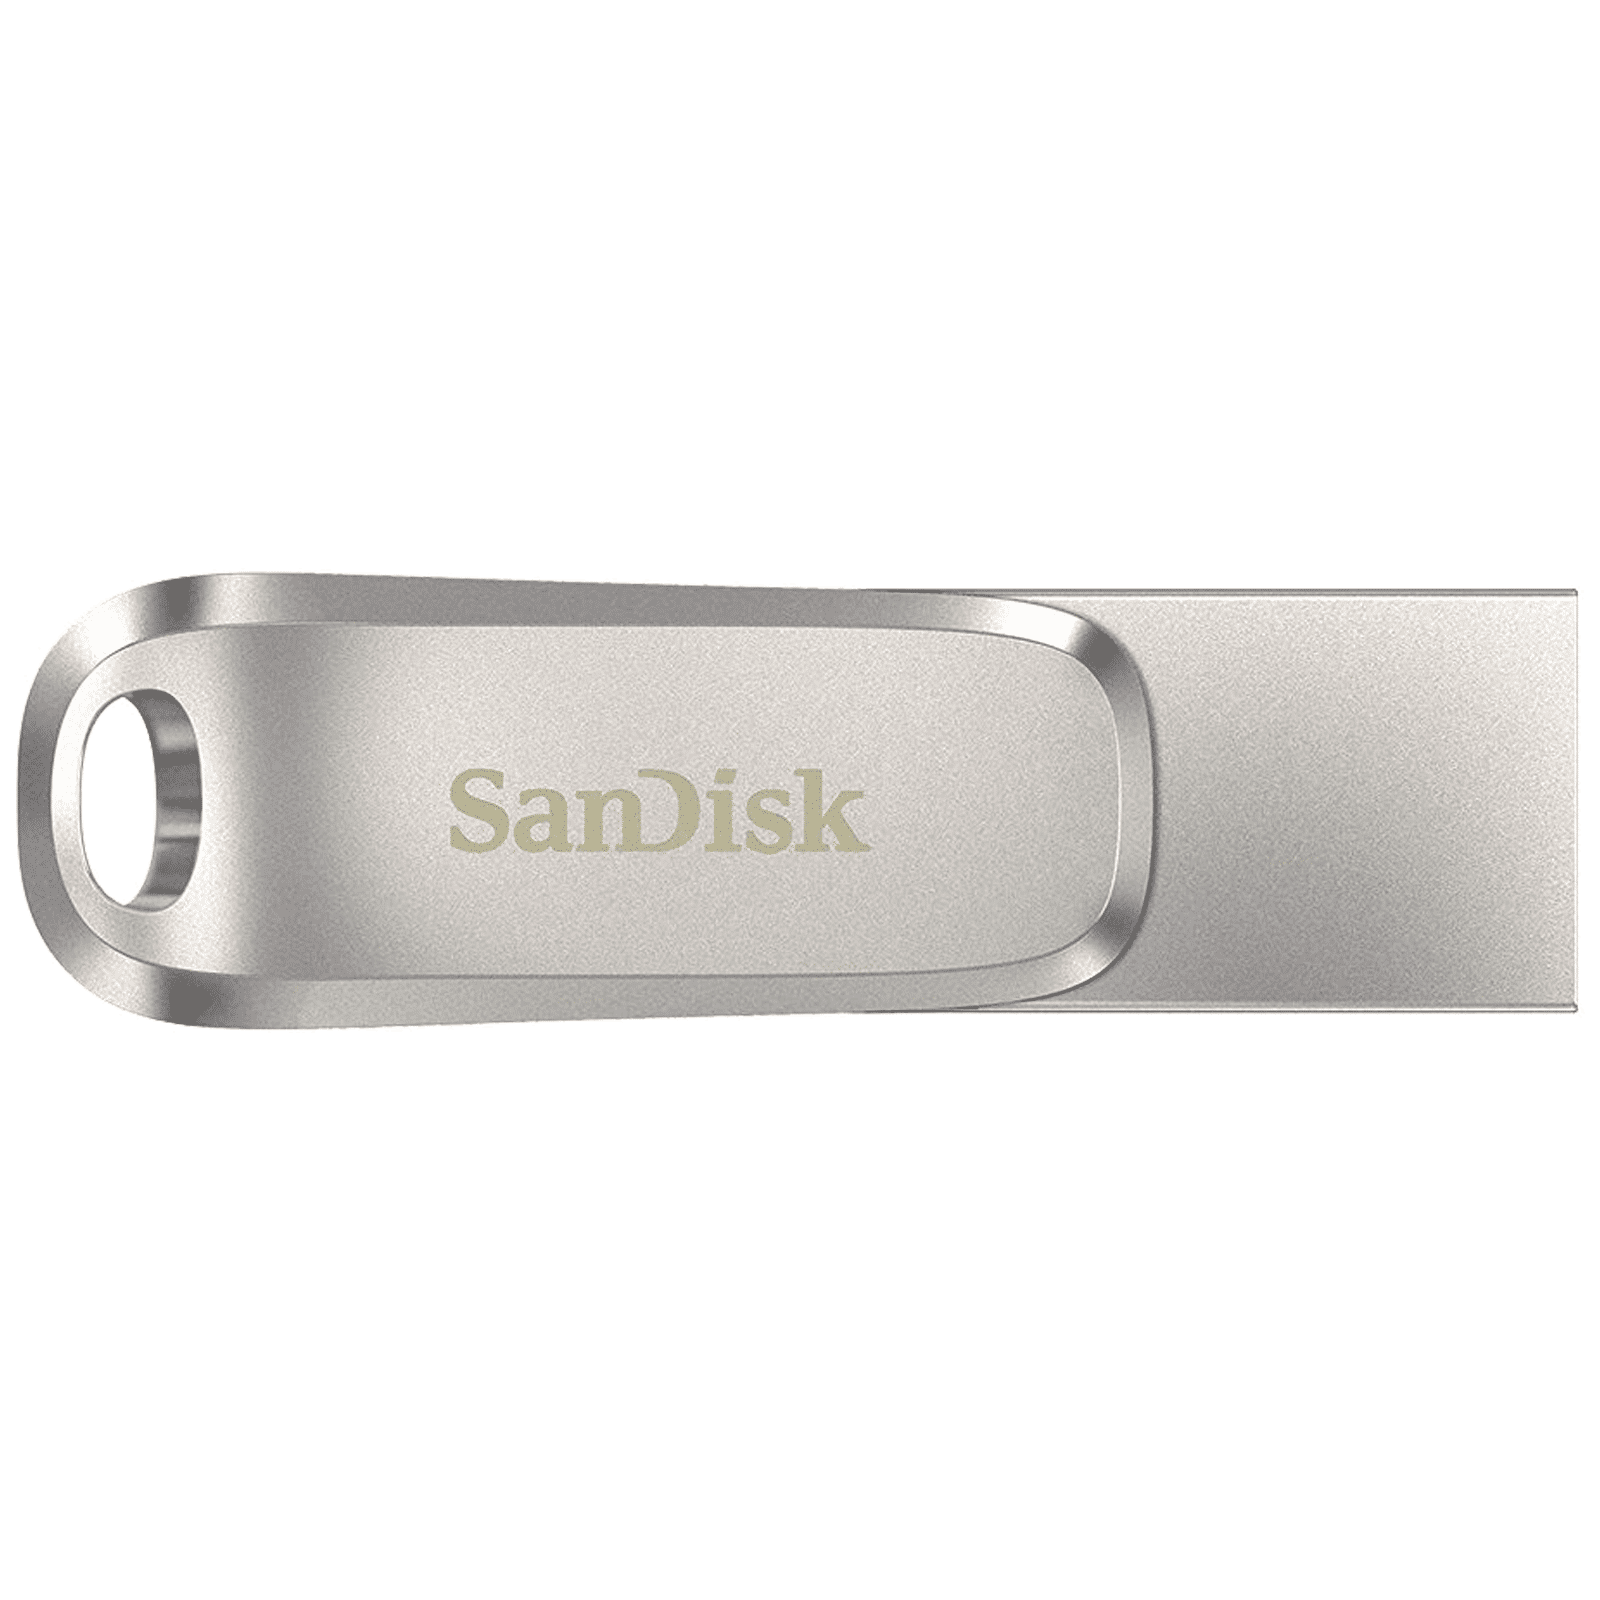 Buy SanDisk Pen Drive 128 GB USB 3.1 online at best rates in India